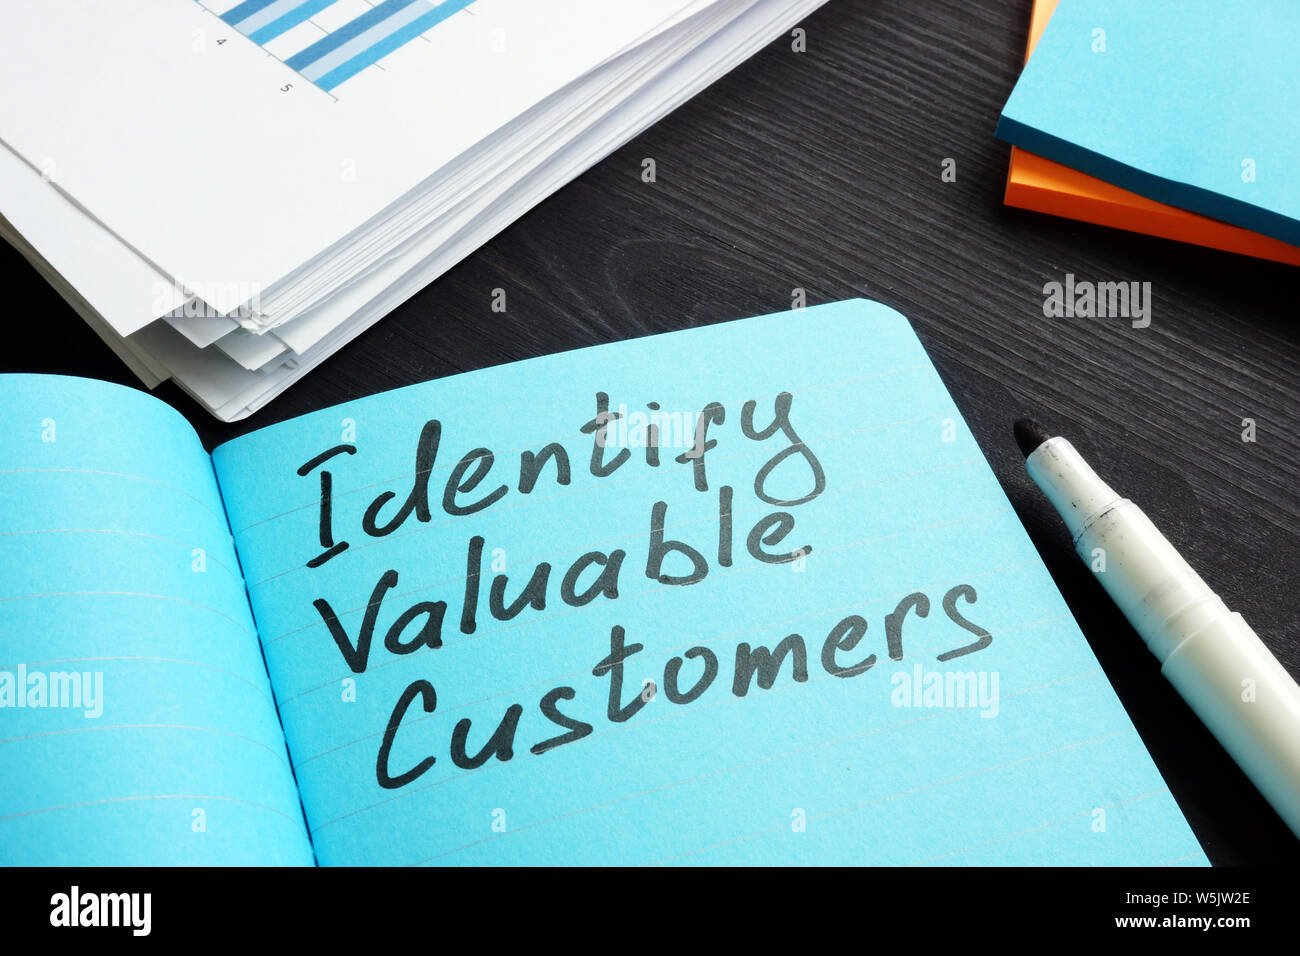 Sign on a page Identify valuable customers RFM Segmentation concept. Stock Photo